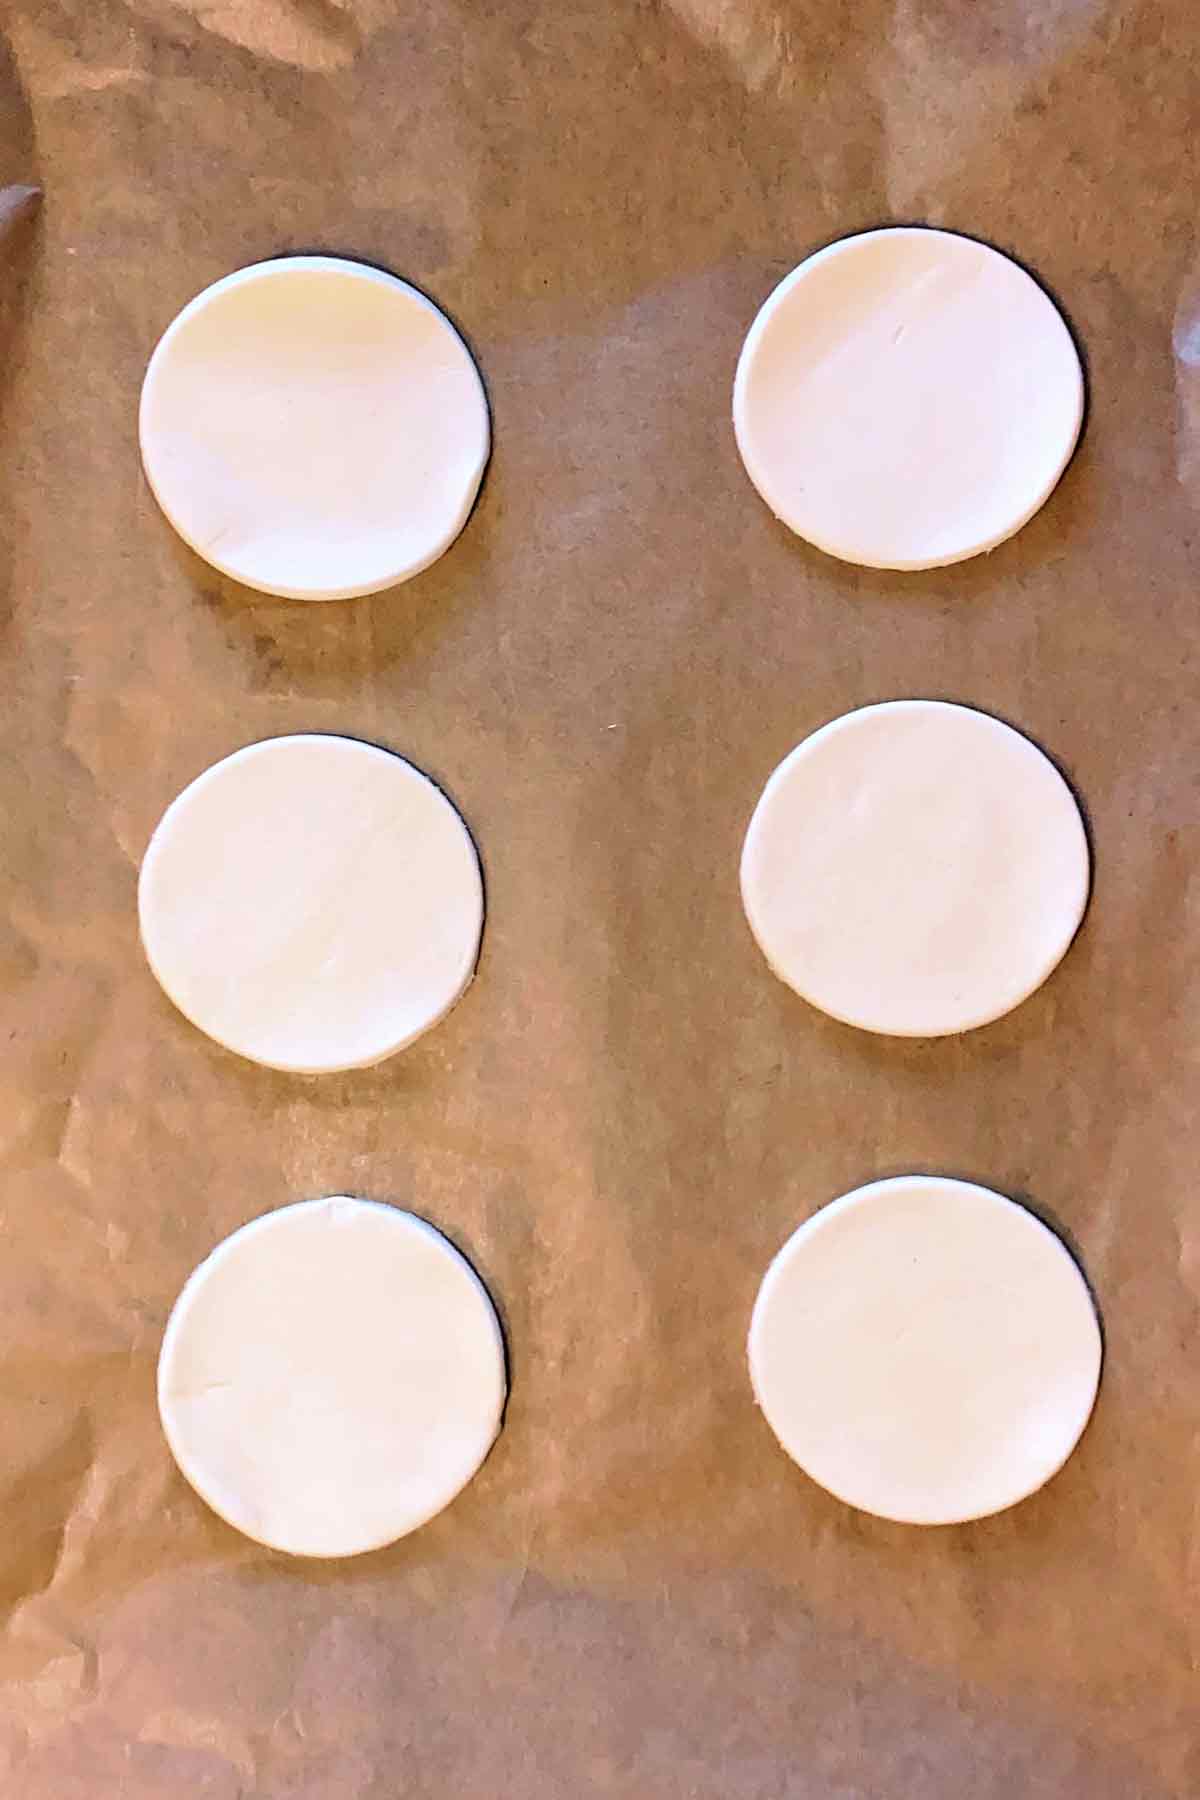 Six pastry disks on a lined baking tray.